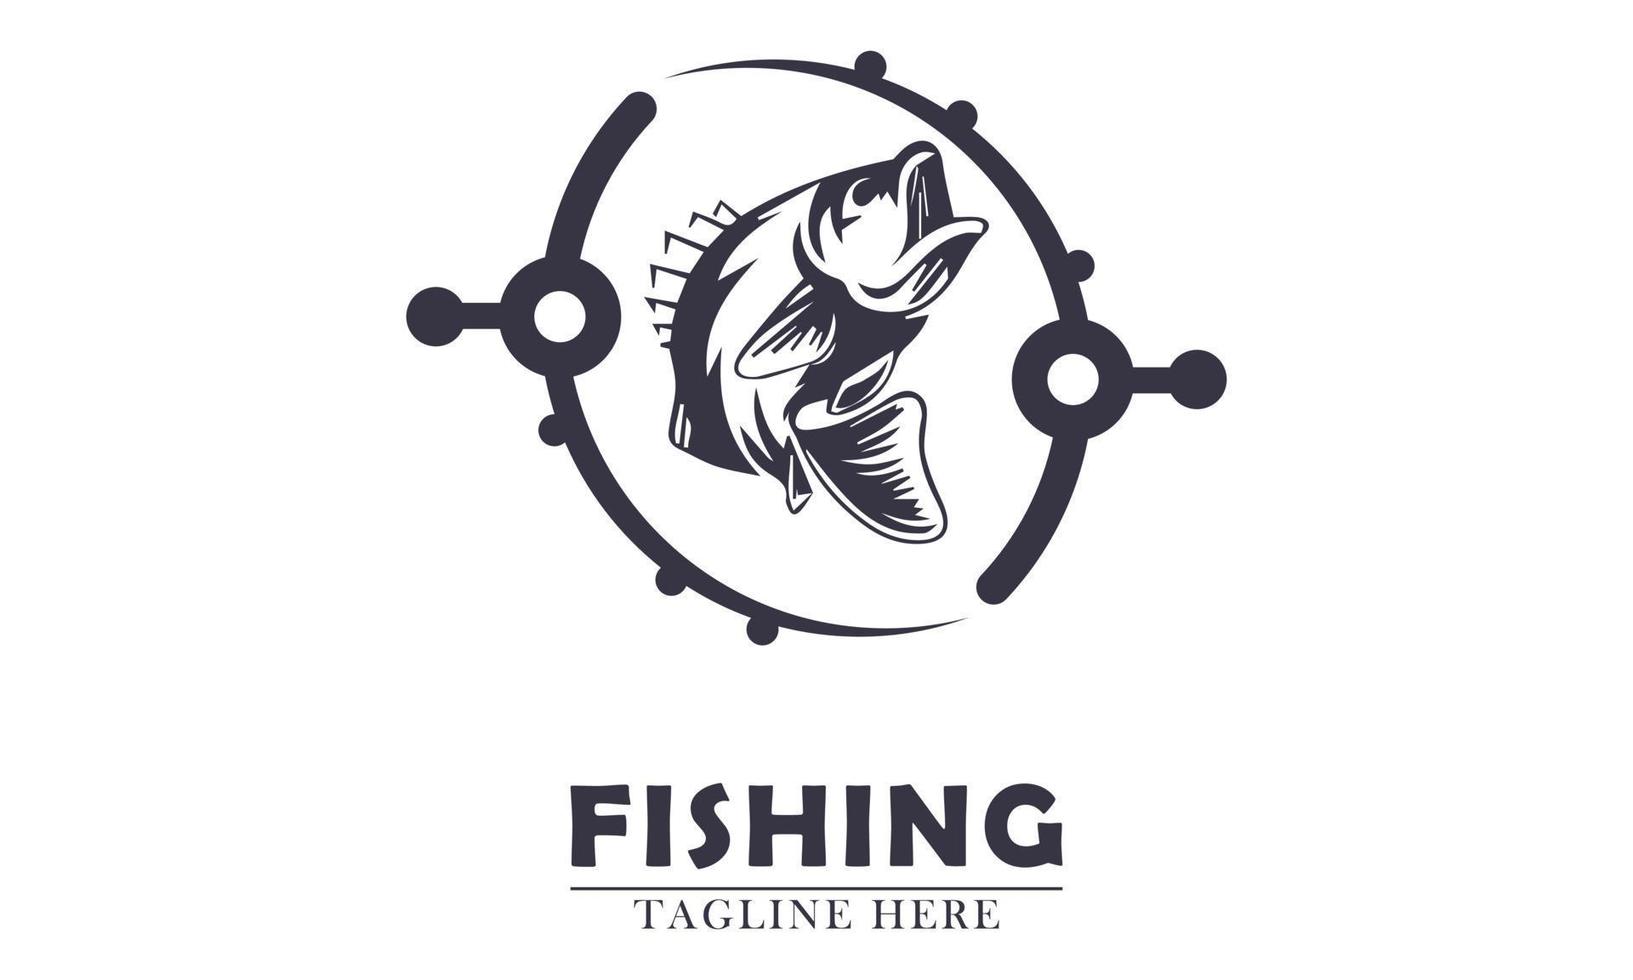 two fishing rods wrapped around a fish simple vector illustration